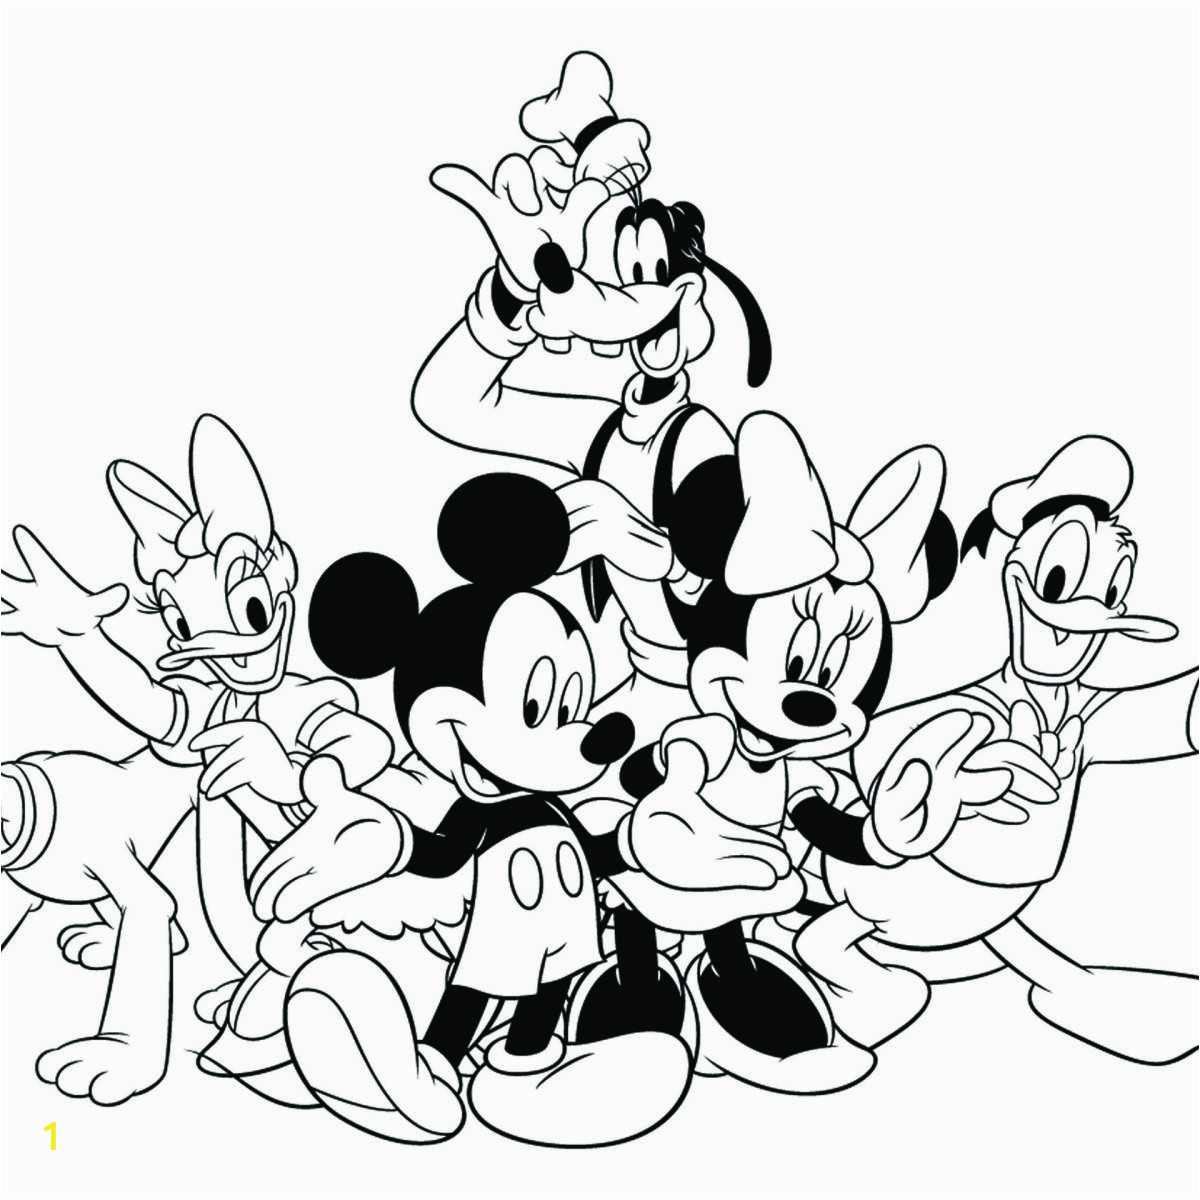 Mickey Mouse and Friends Coloring Pages | divyajanani.org